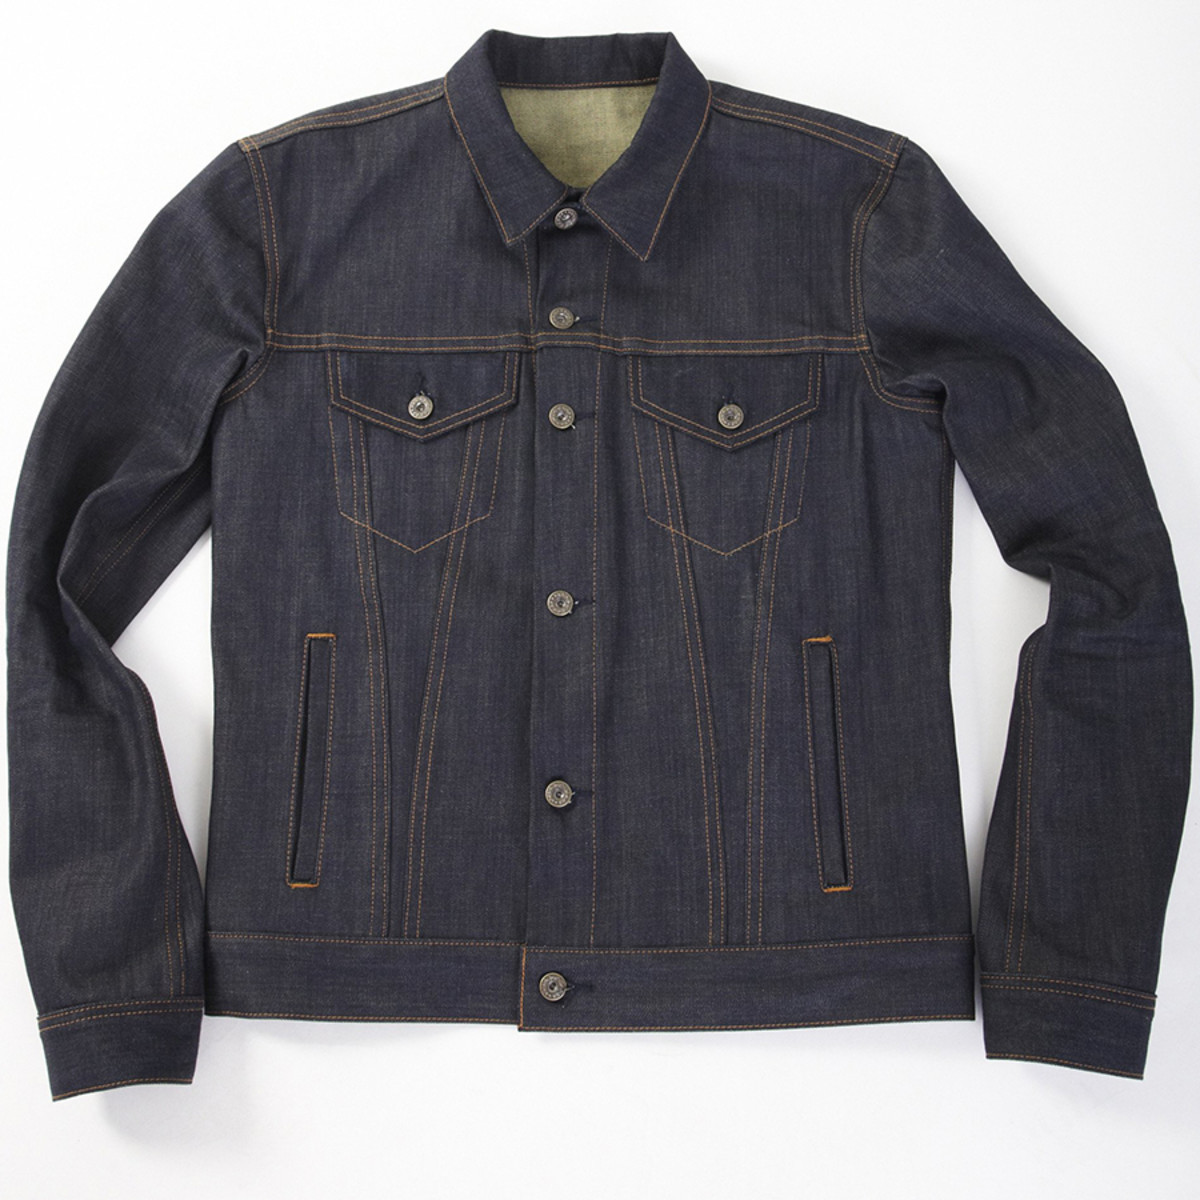 American-Made Denim Jackets From Levi's, Rag & Bone and More - Men's Journal